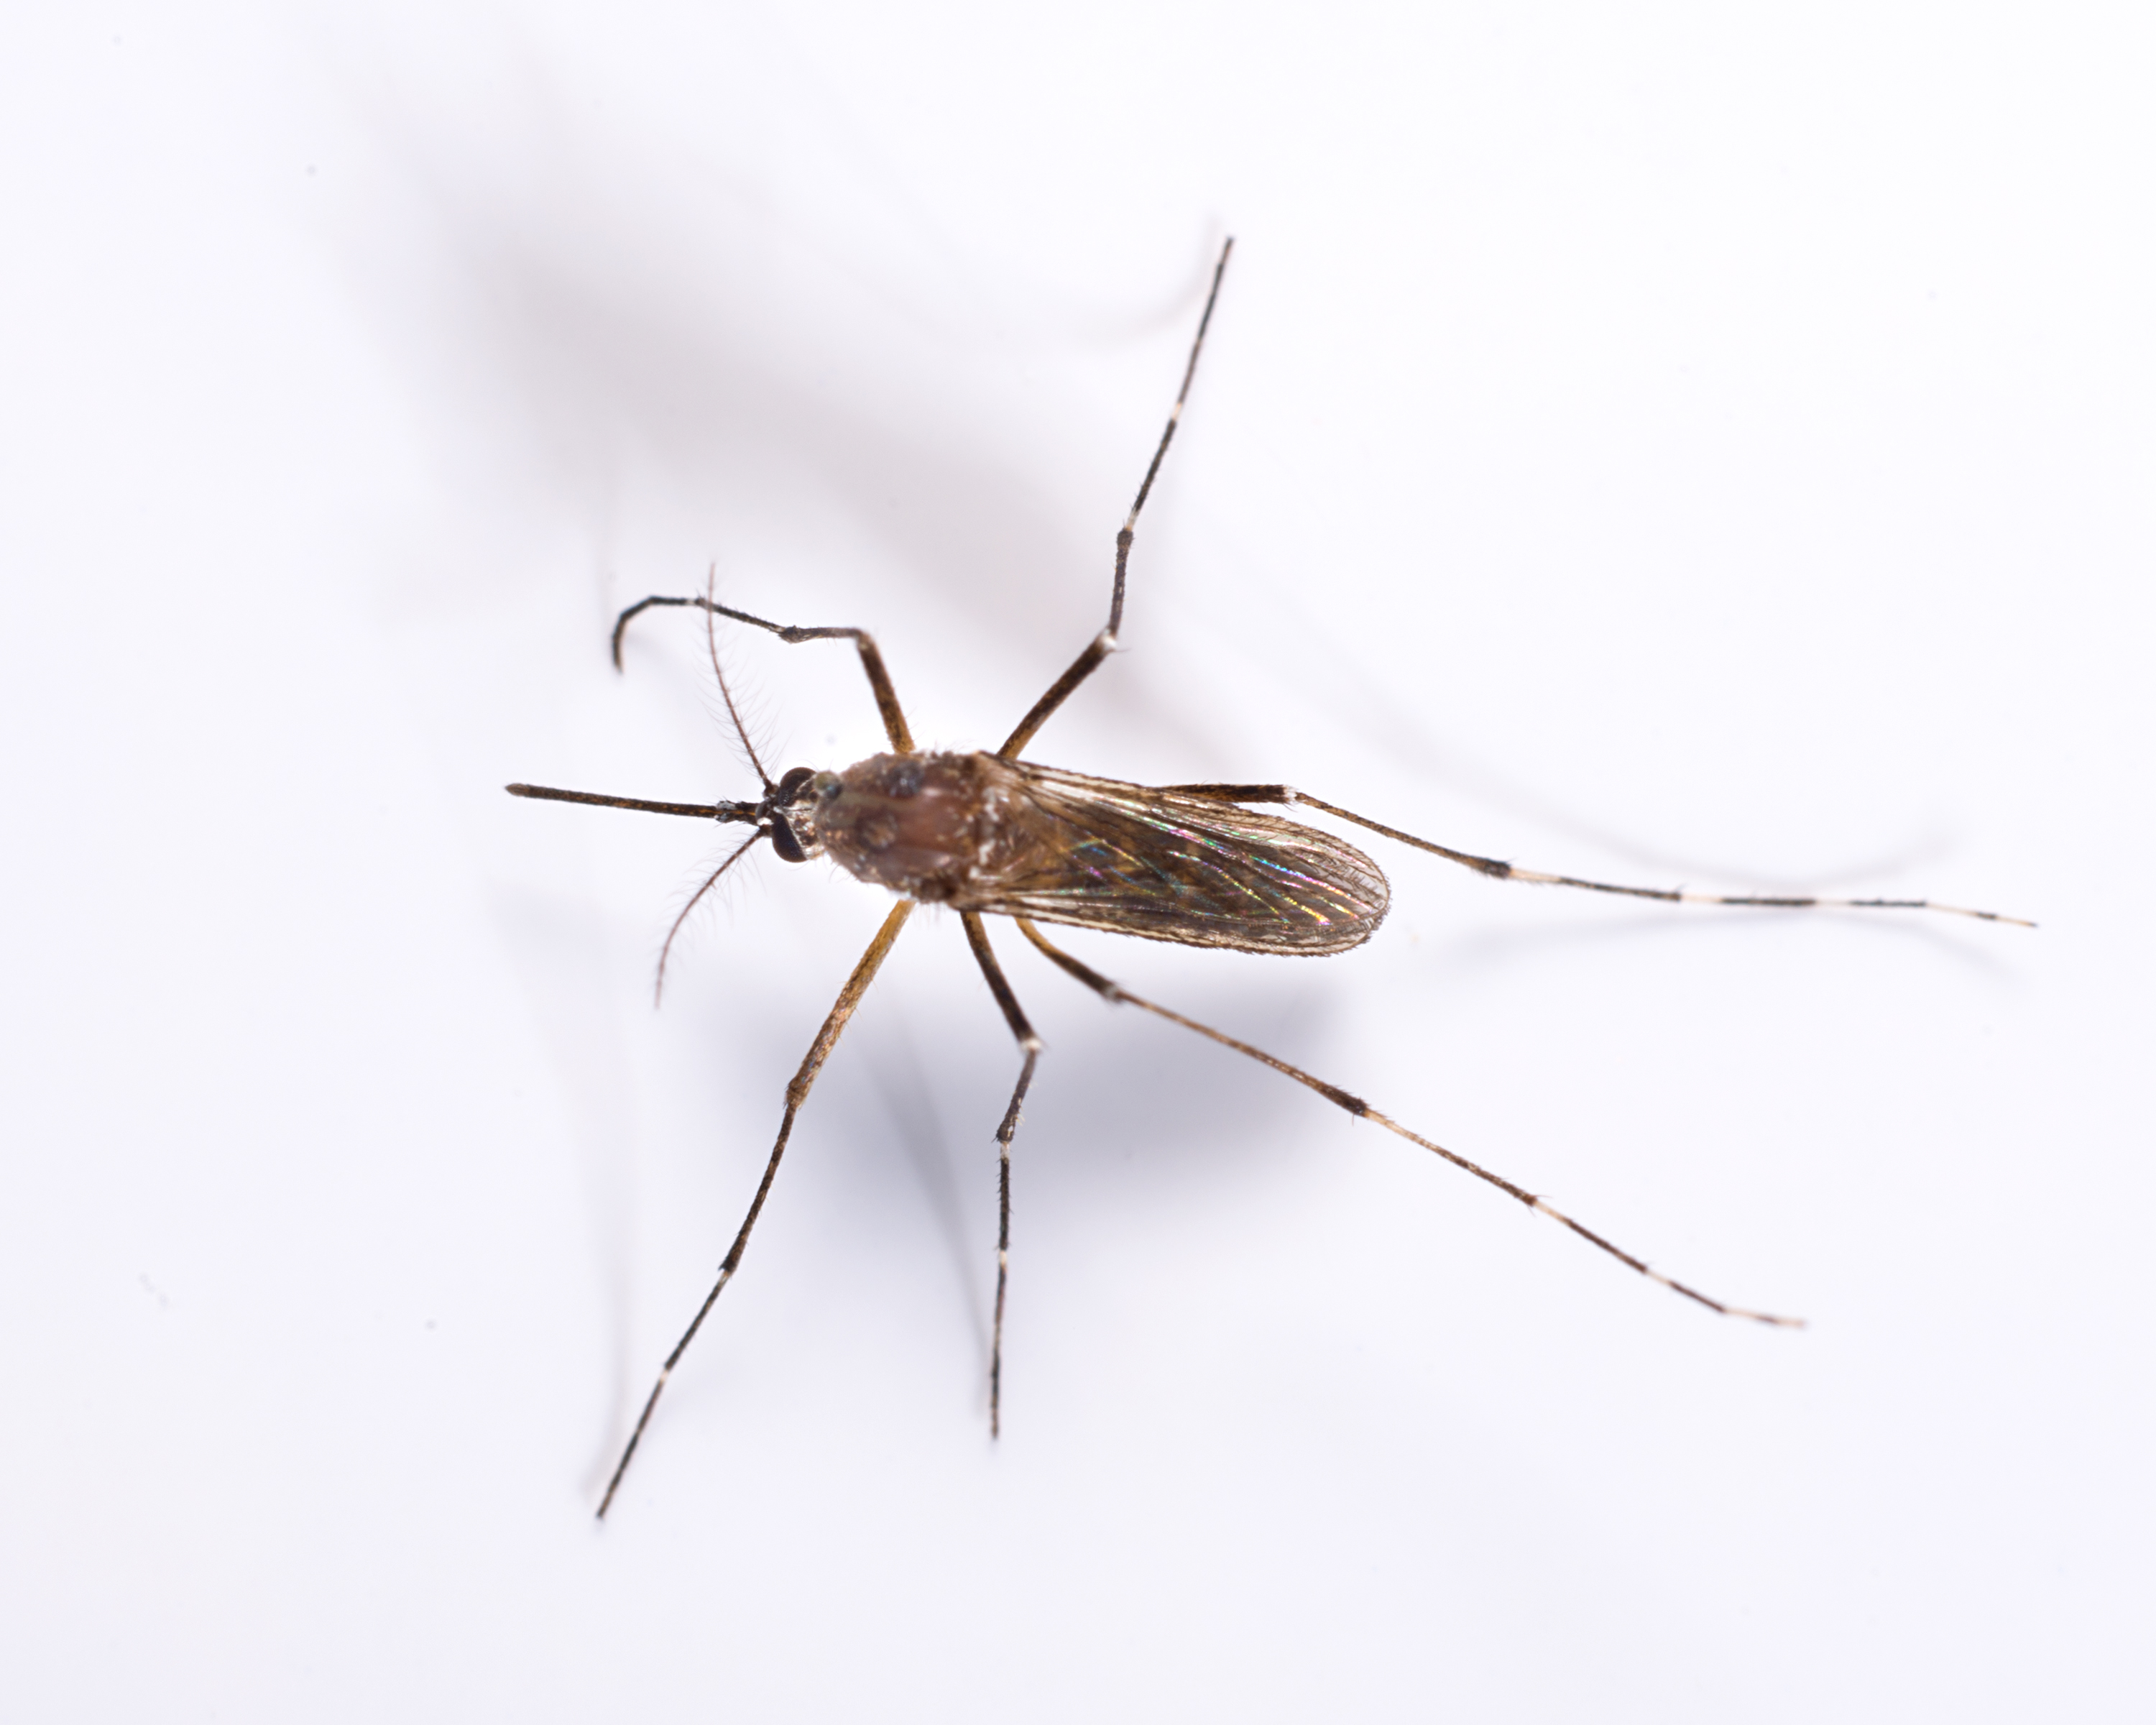 Do you know how to control mosquitoes?